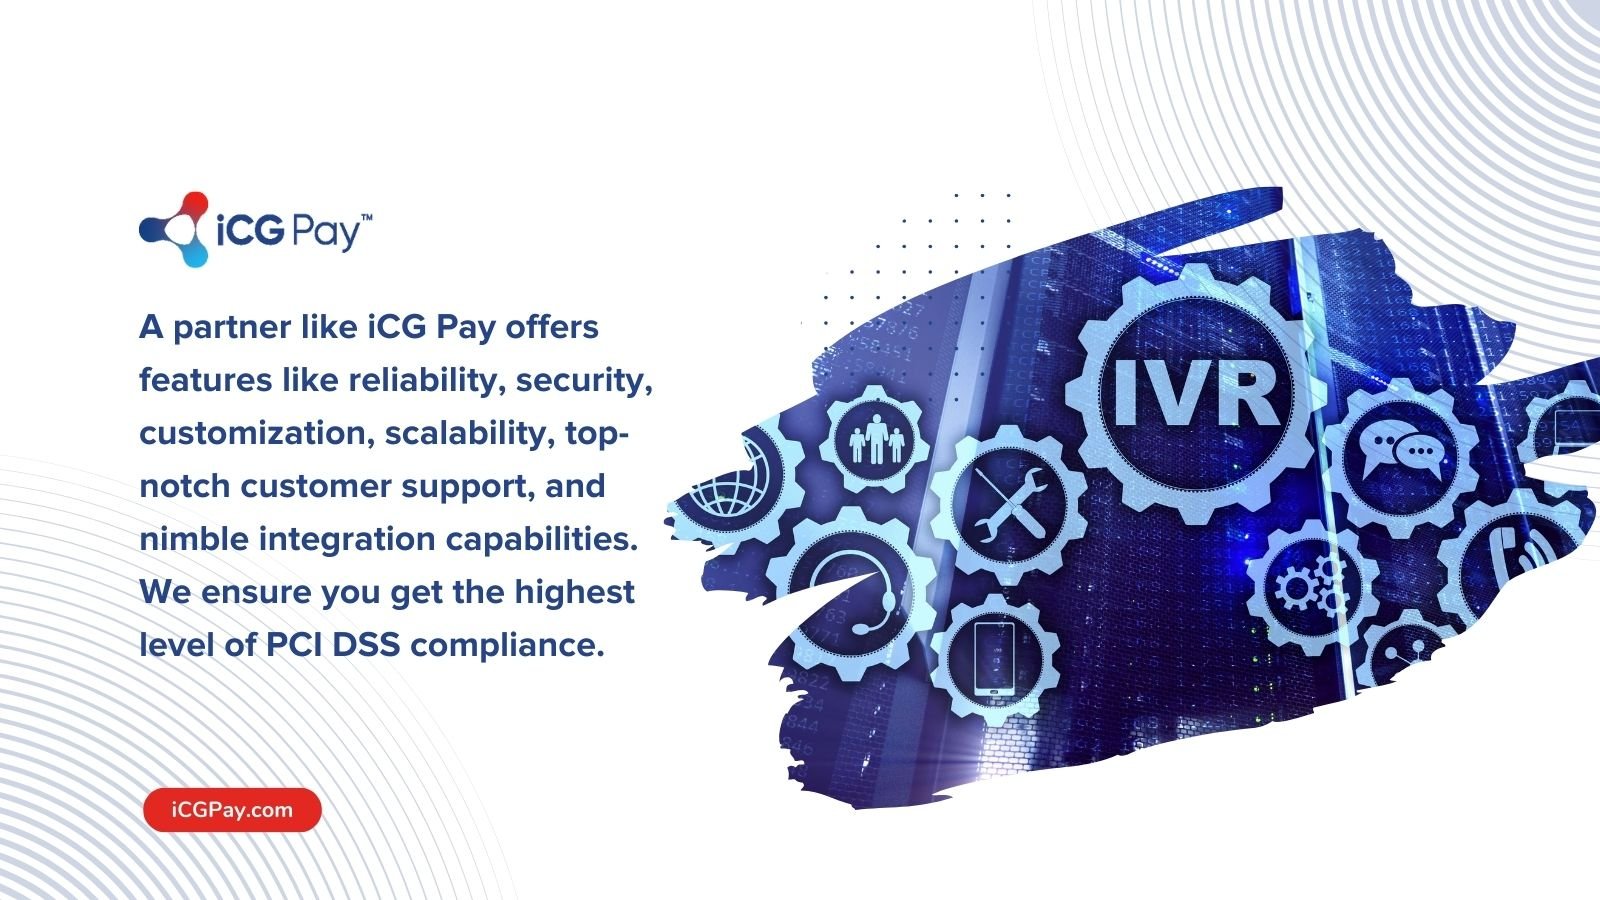 IVR from iCG Pay